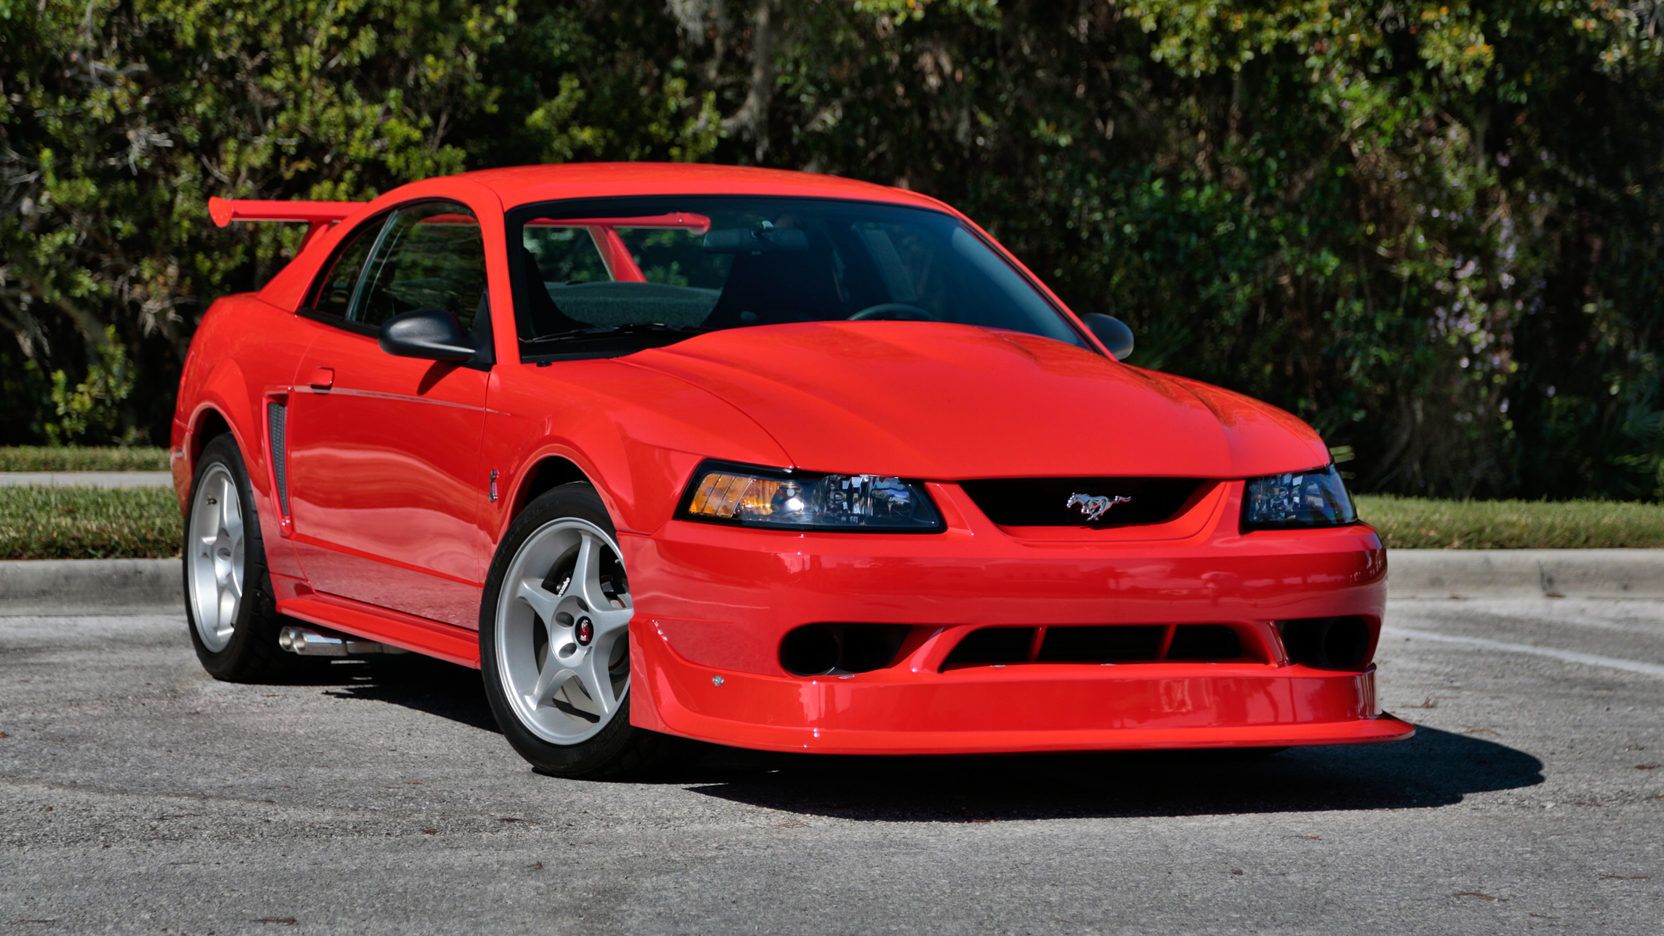 2000 Ford Mustang SVT Cobra R at Kissimmee 2017 as T205